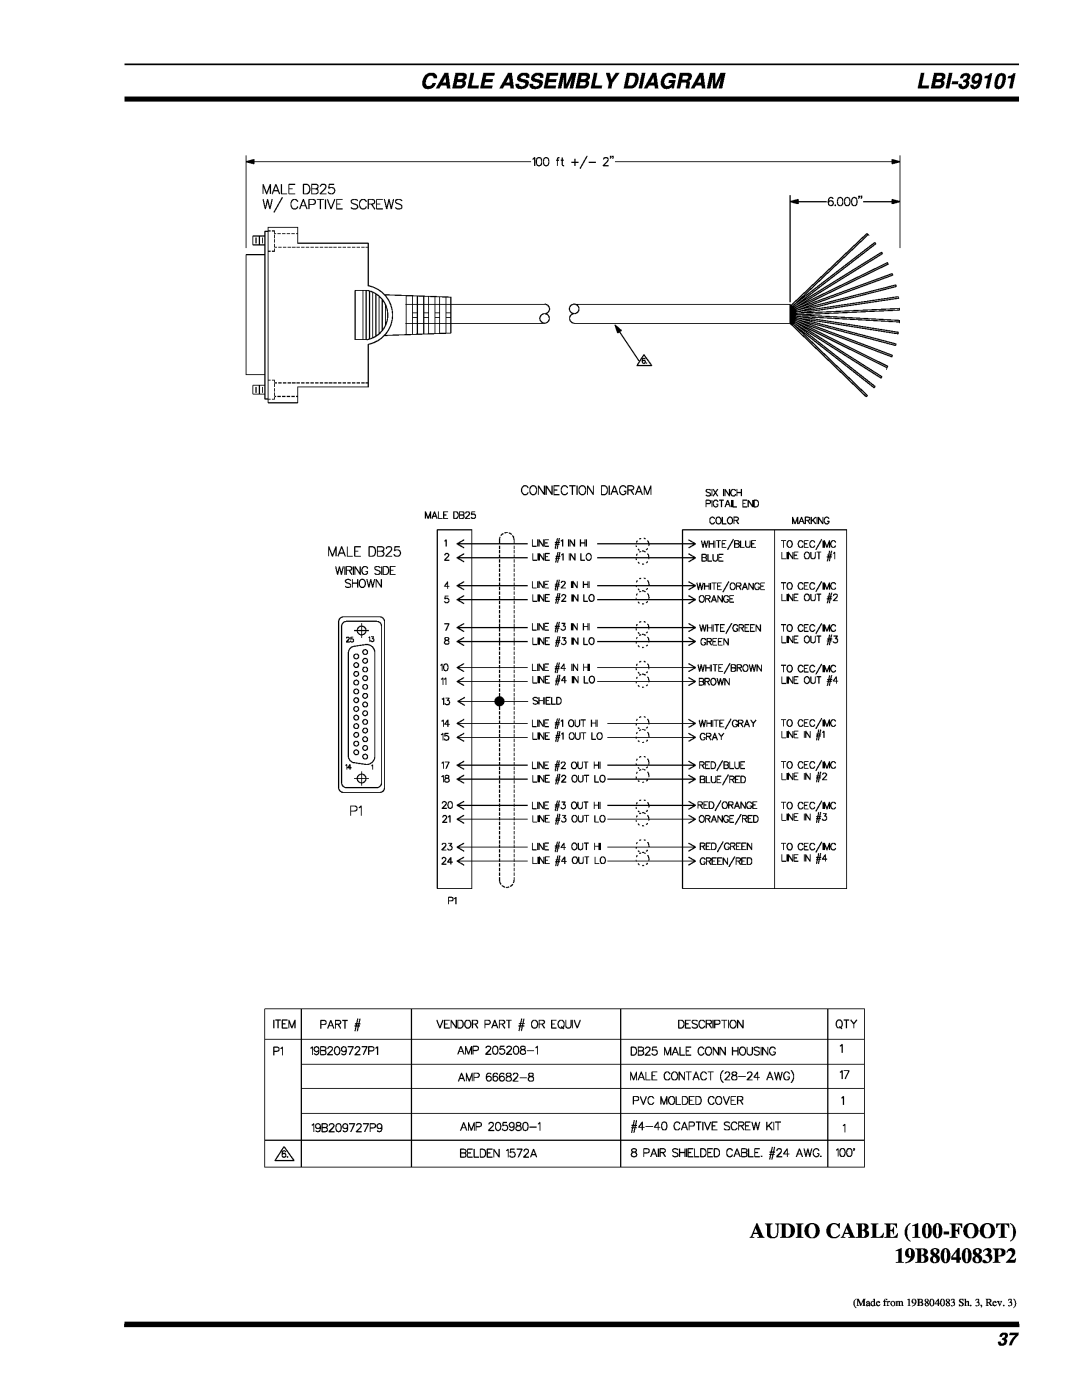 Ericsson LBI-39101A manual AUDIO CABLE 100-FOOT19B804083P2, Cable Assembly Diagram, Made from 19B804083 Sh. 3, Rev 